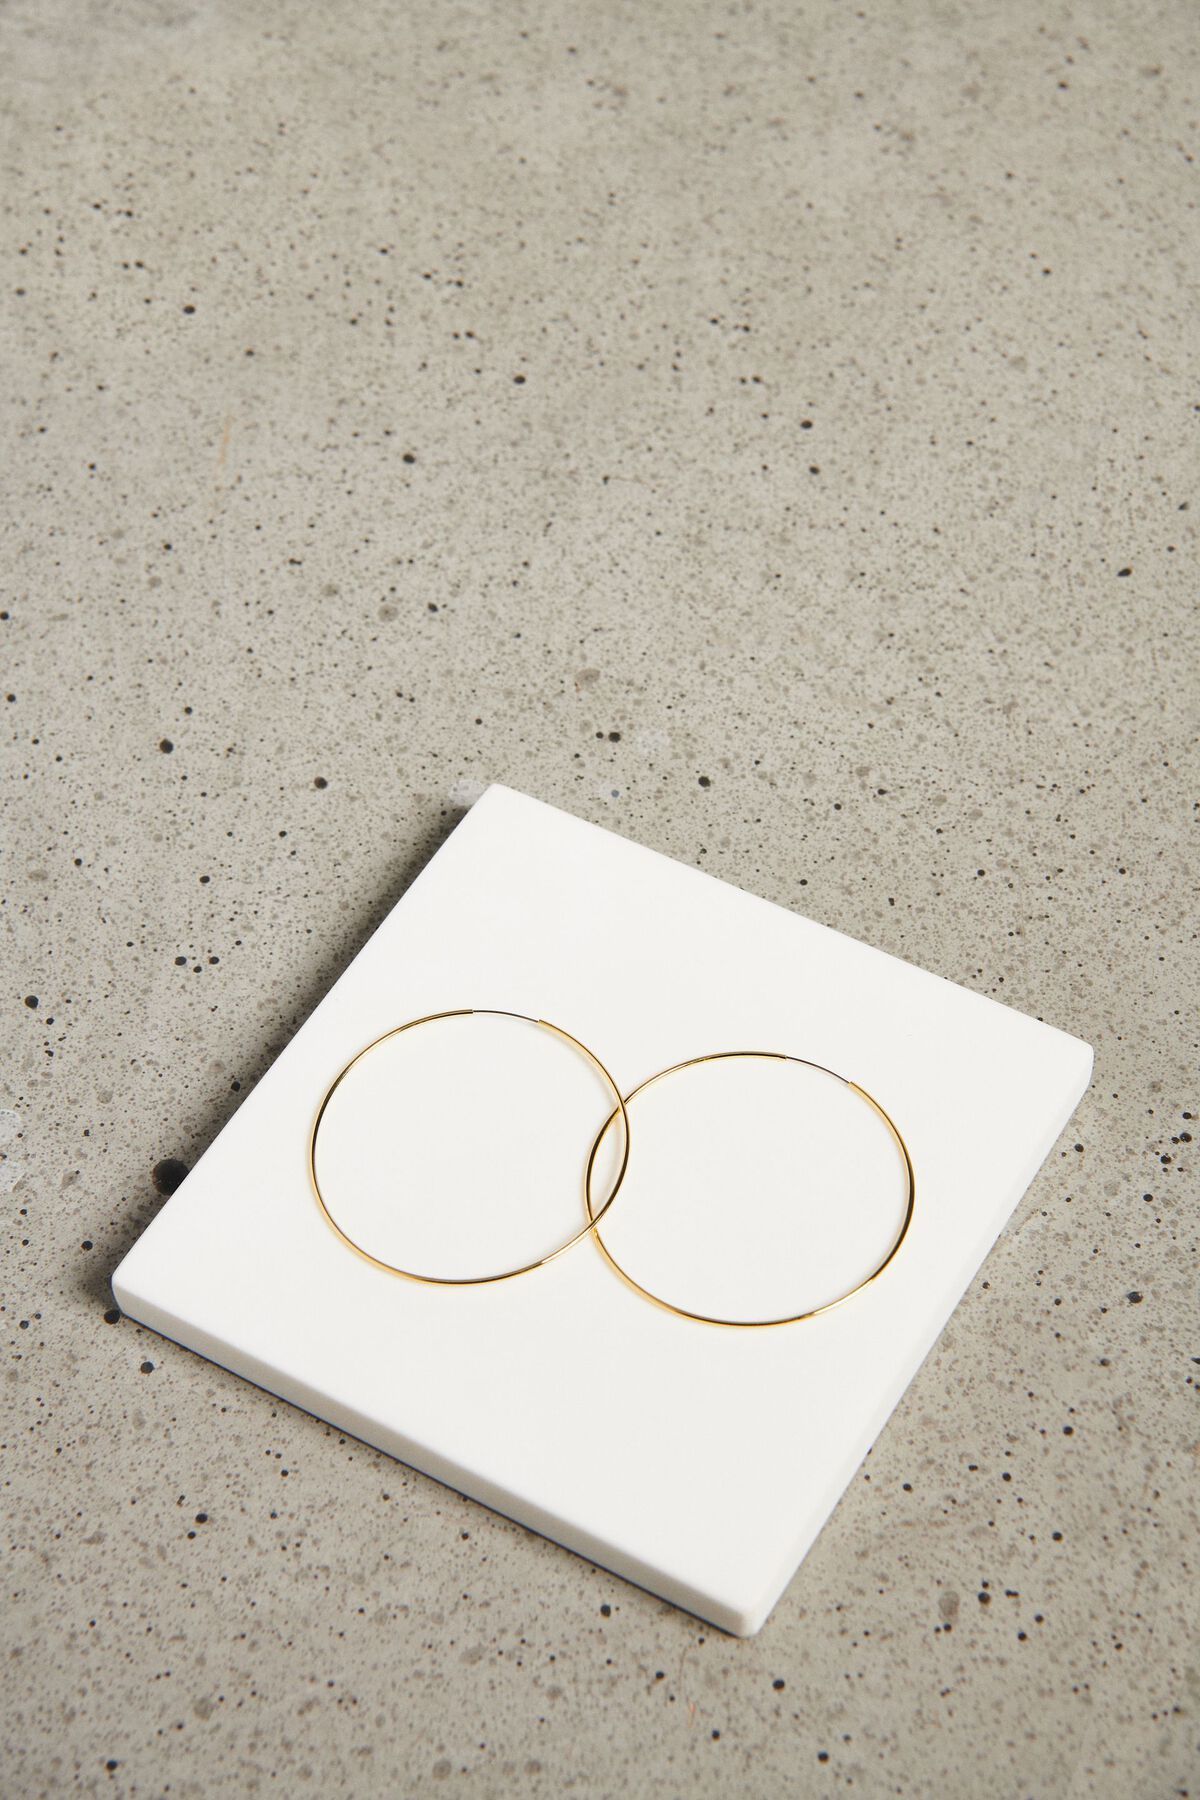 Dynamite 14K Gold Plated Endless Thin Hoops. 4